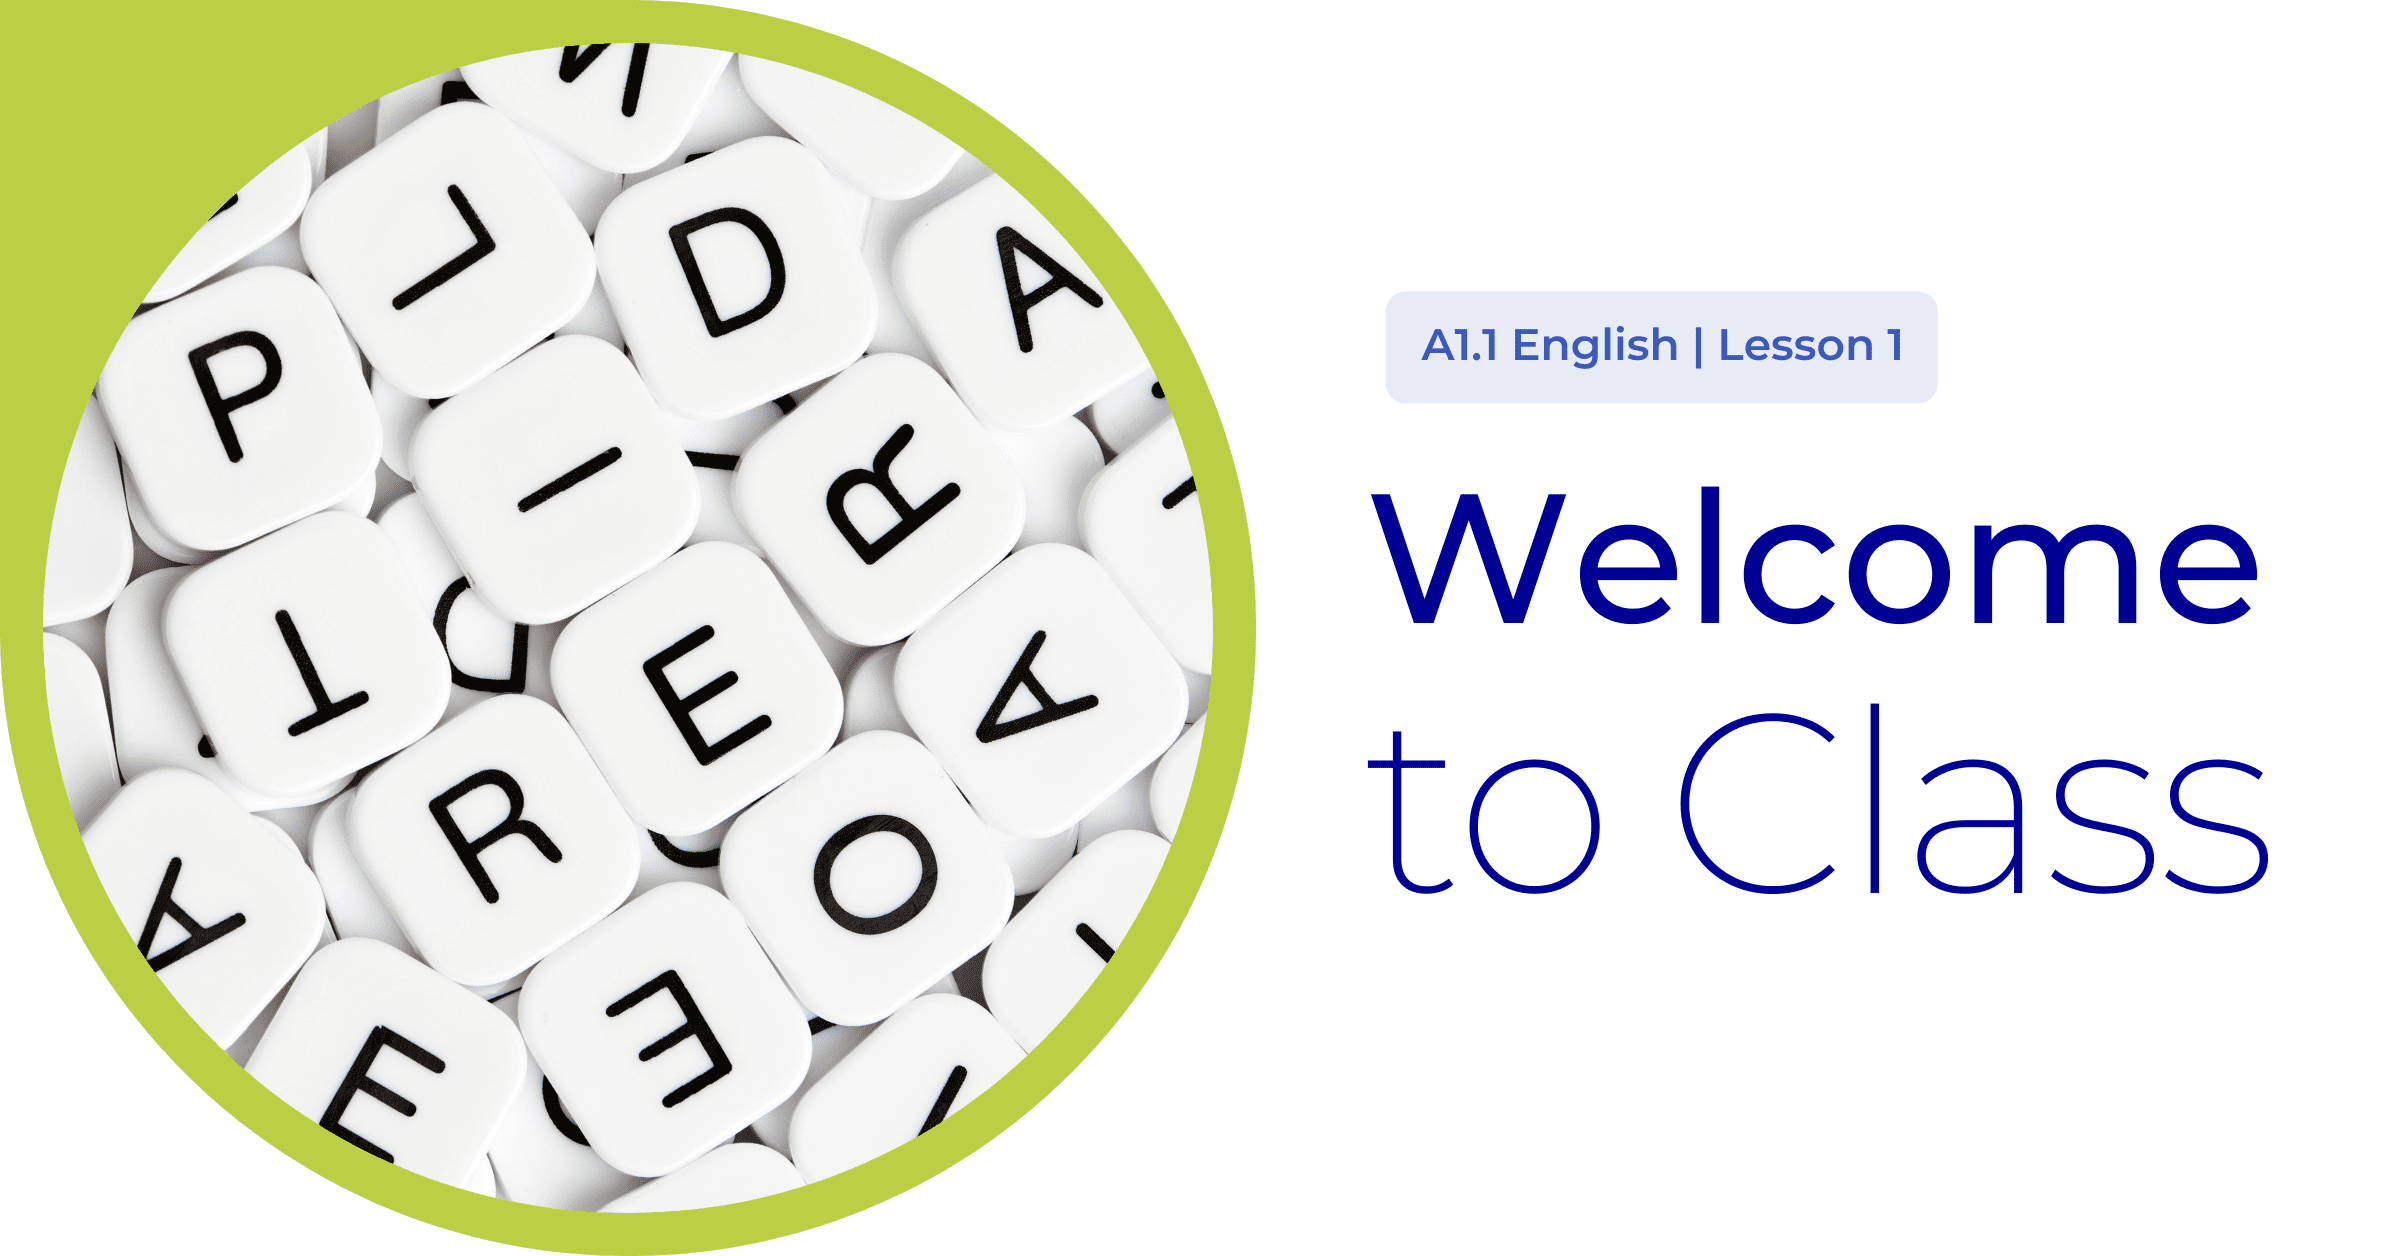 a1 beginner English lesson 1 welcome to class banner